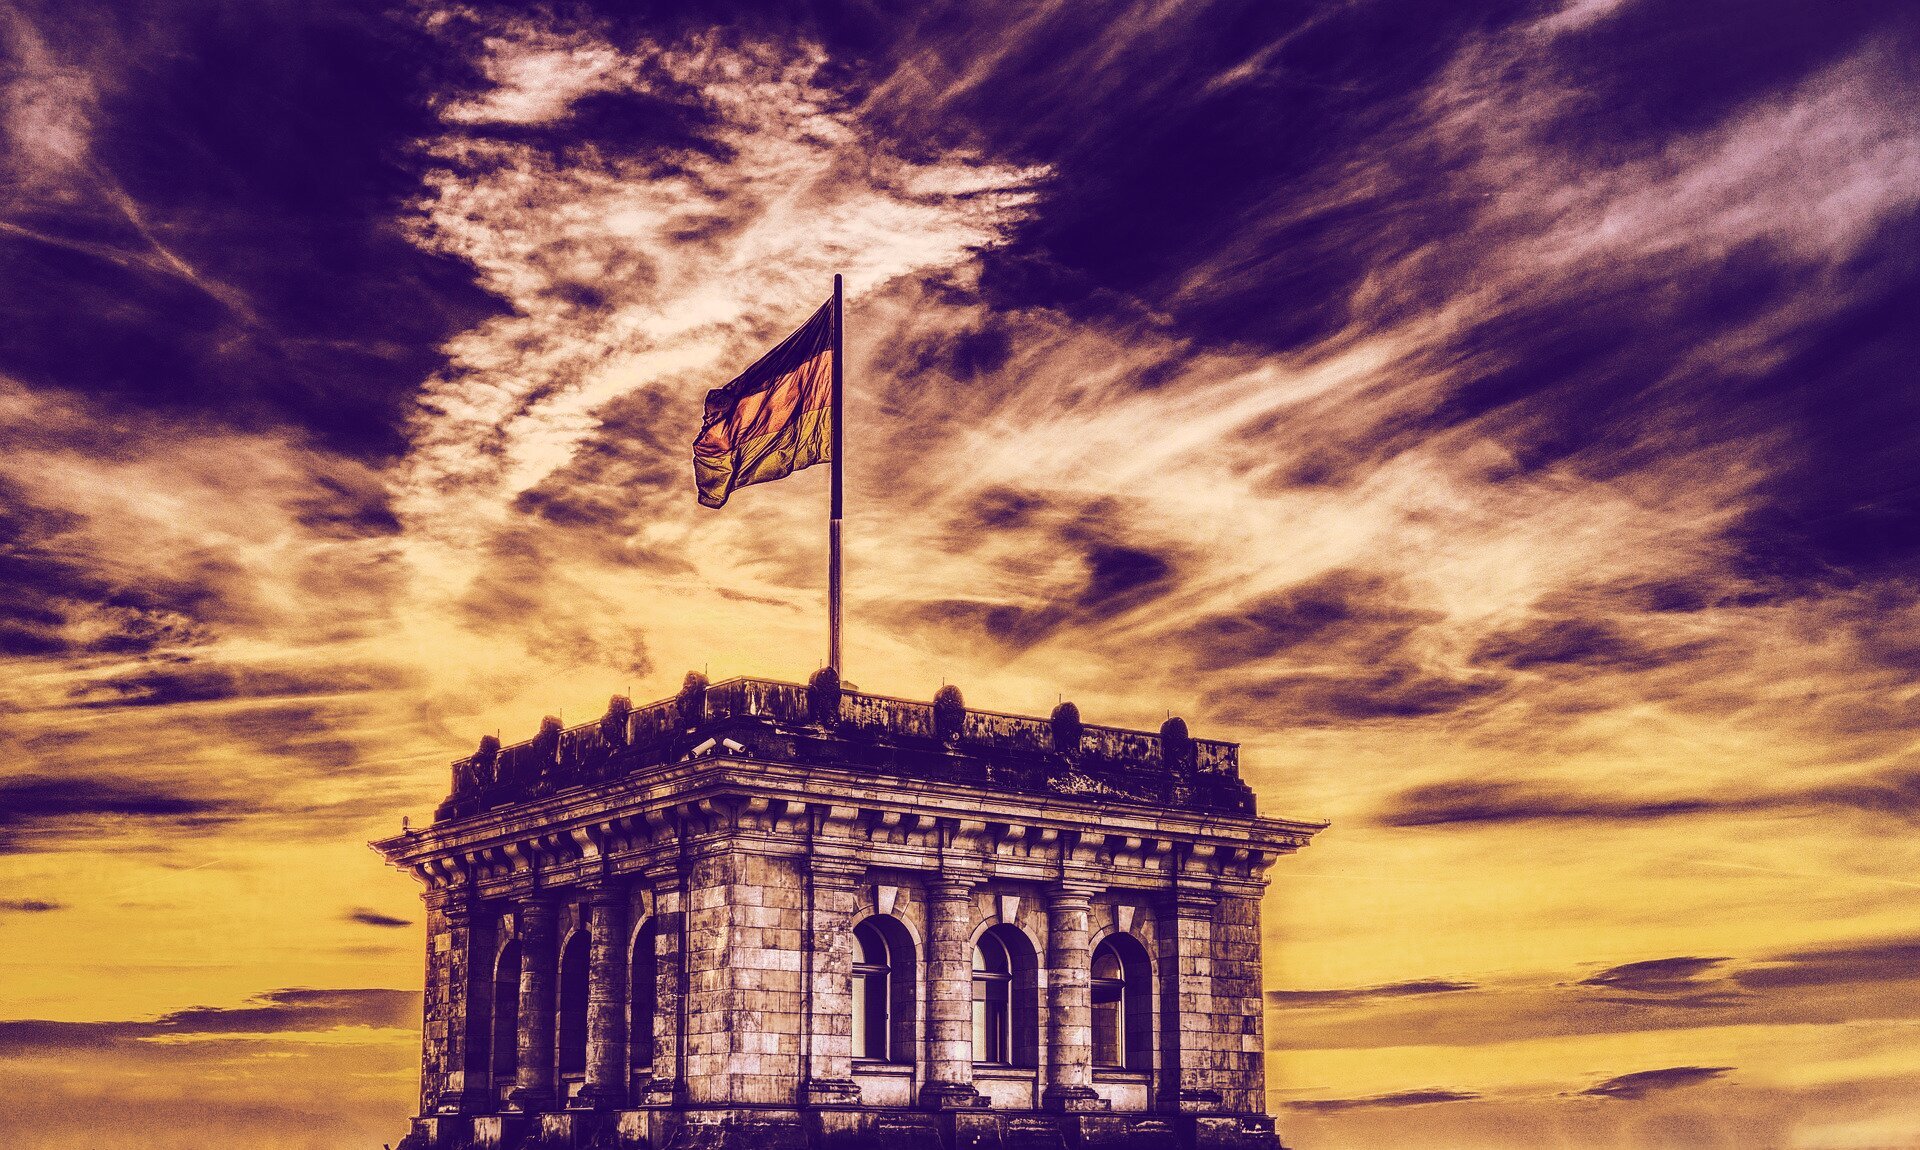 Germany Won't Tax Bitcoin, Ethereum Sold After One Year of Possession